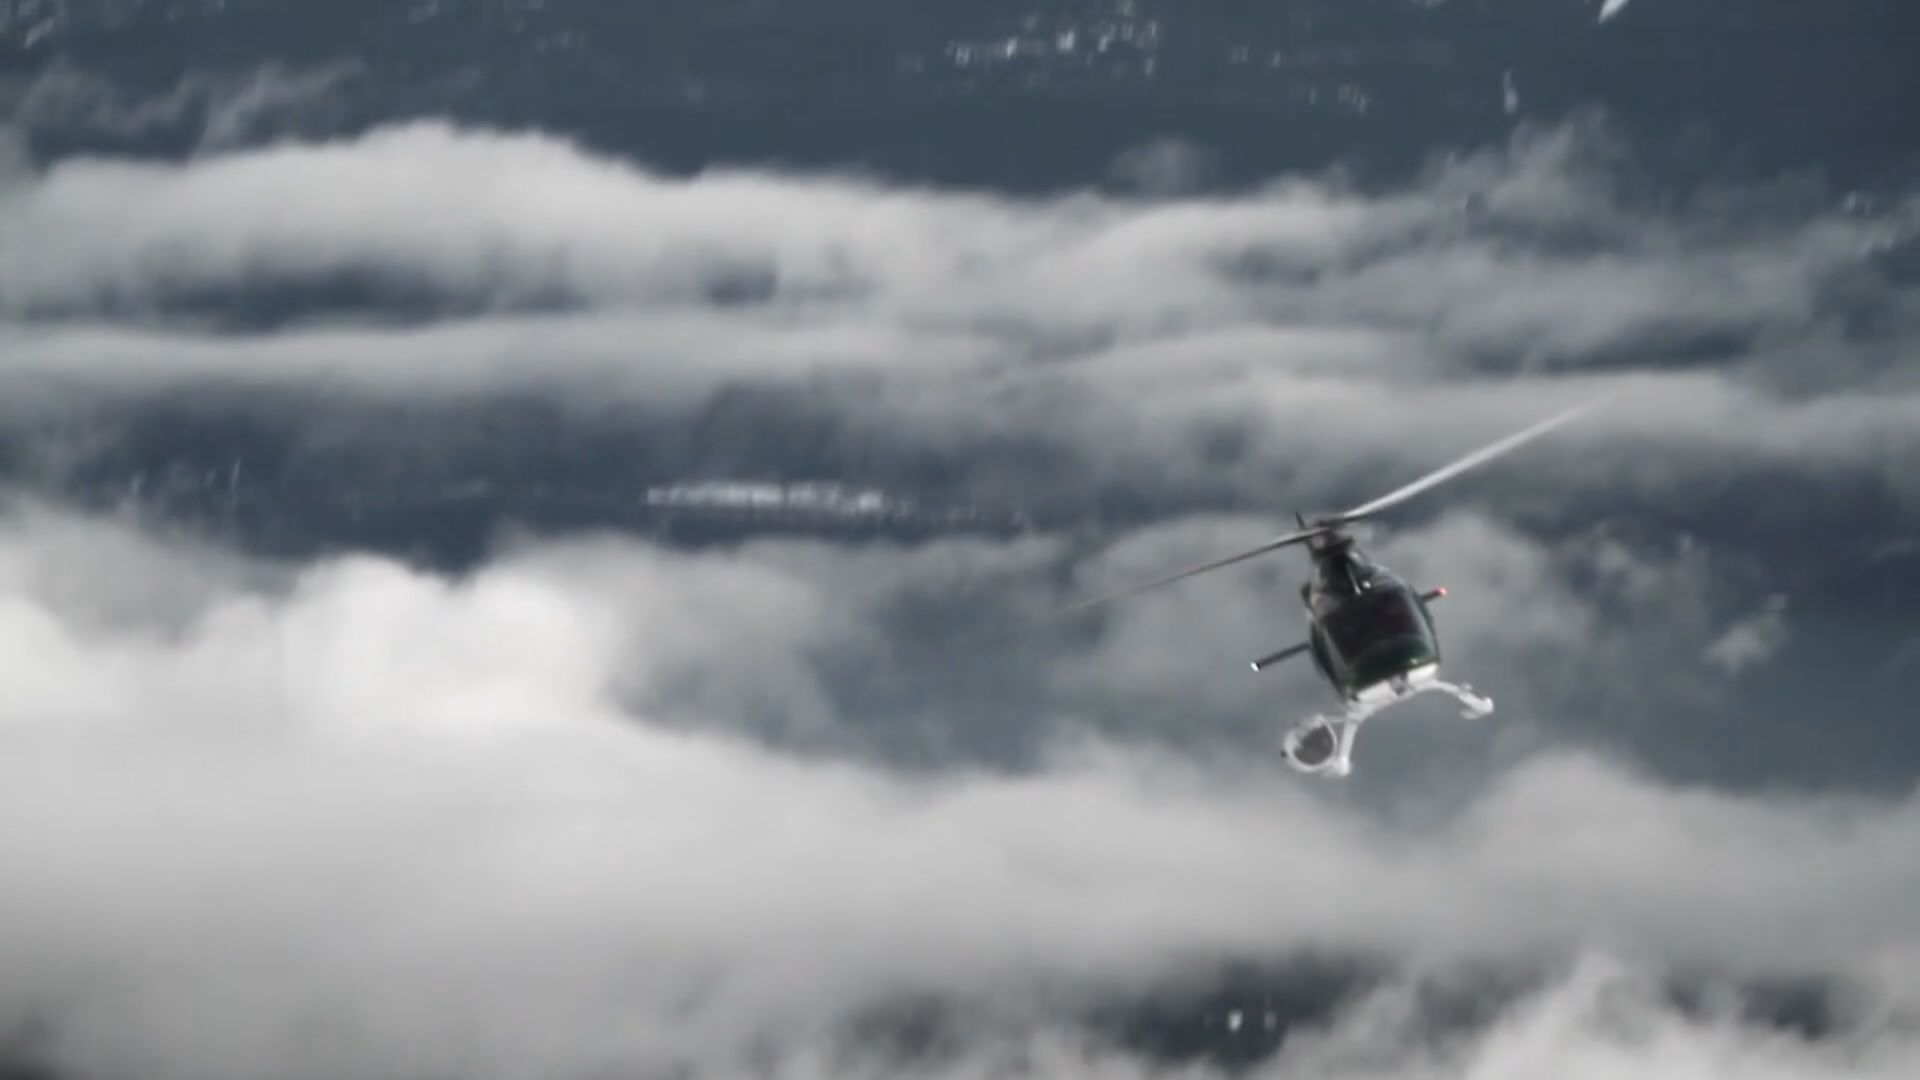 B.C. fatal crash: Ottawa needs to ‘catch up’ to operators on helicopter safety, industry says